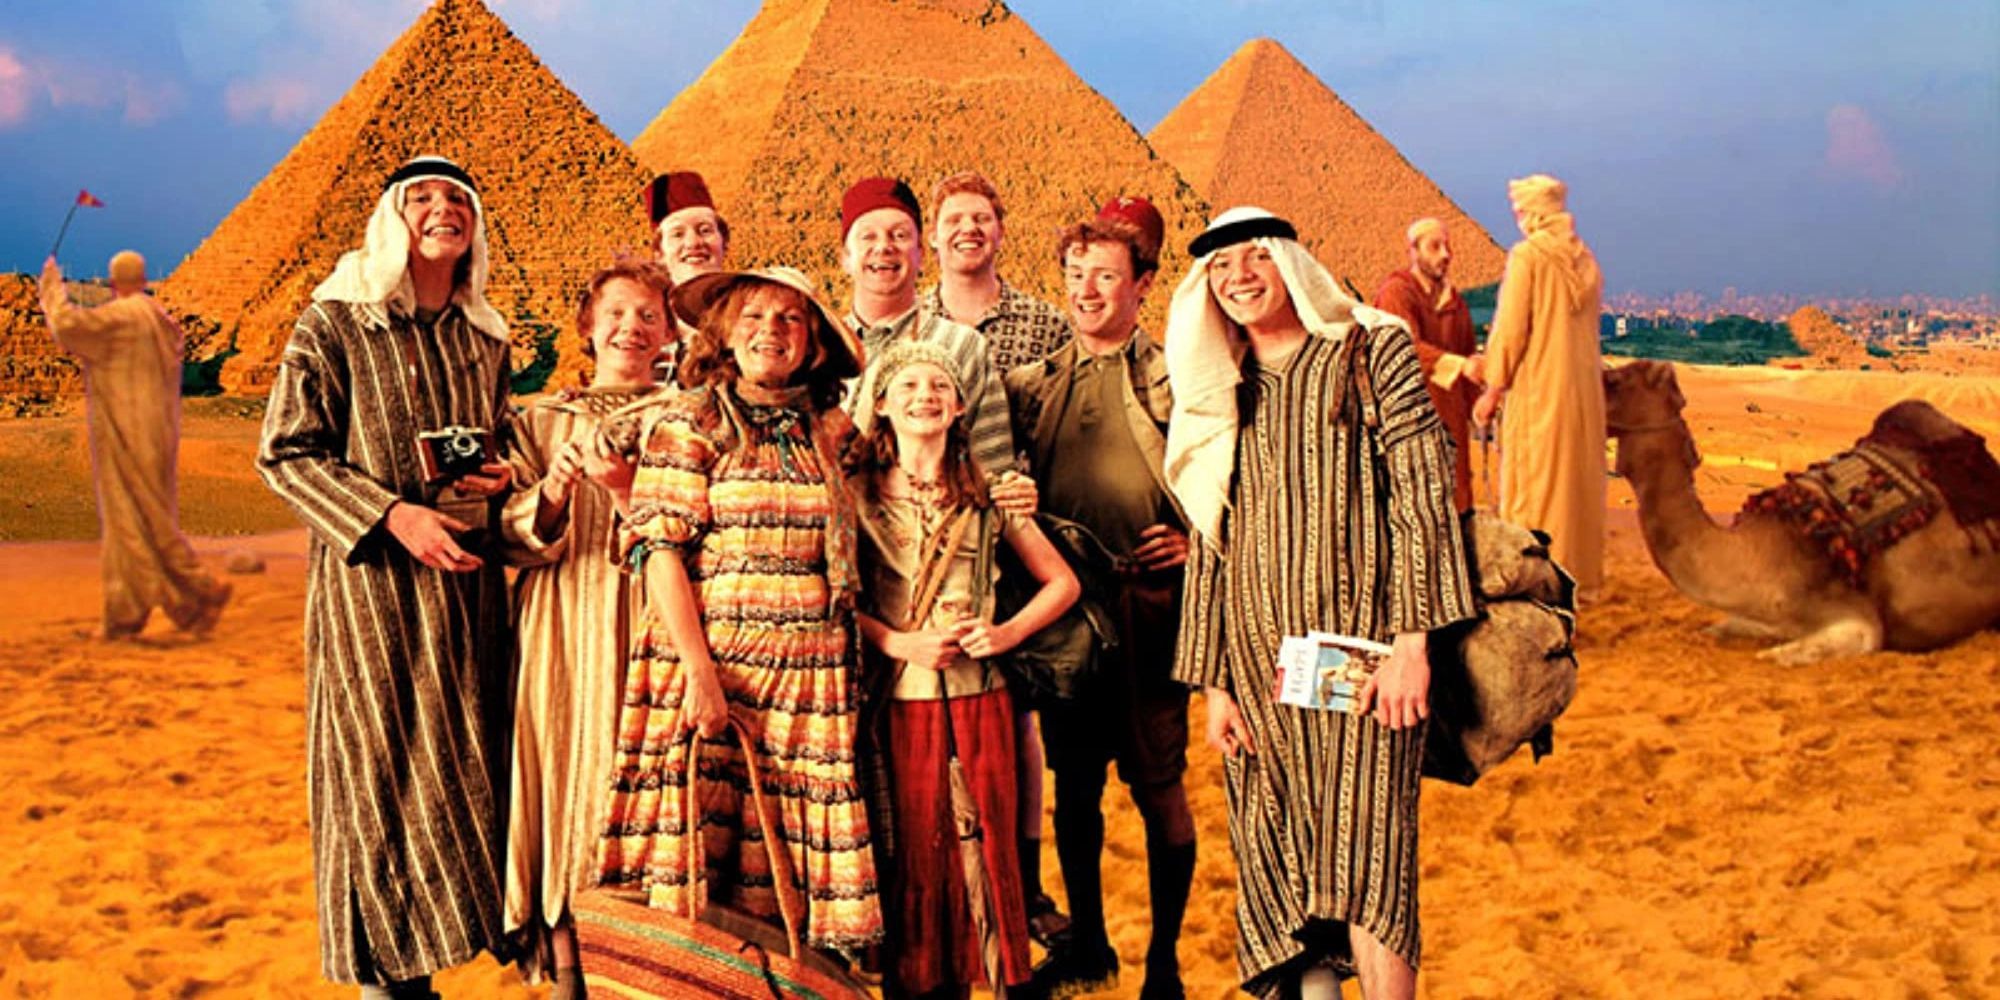 Harry Potter Weasley family photo in Egypt